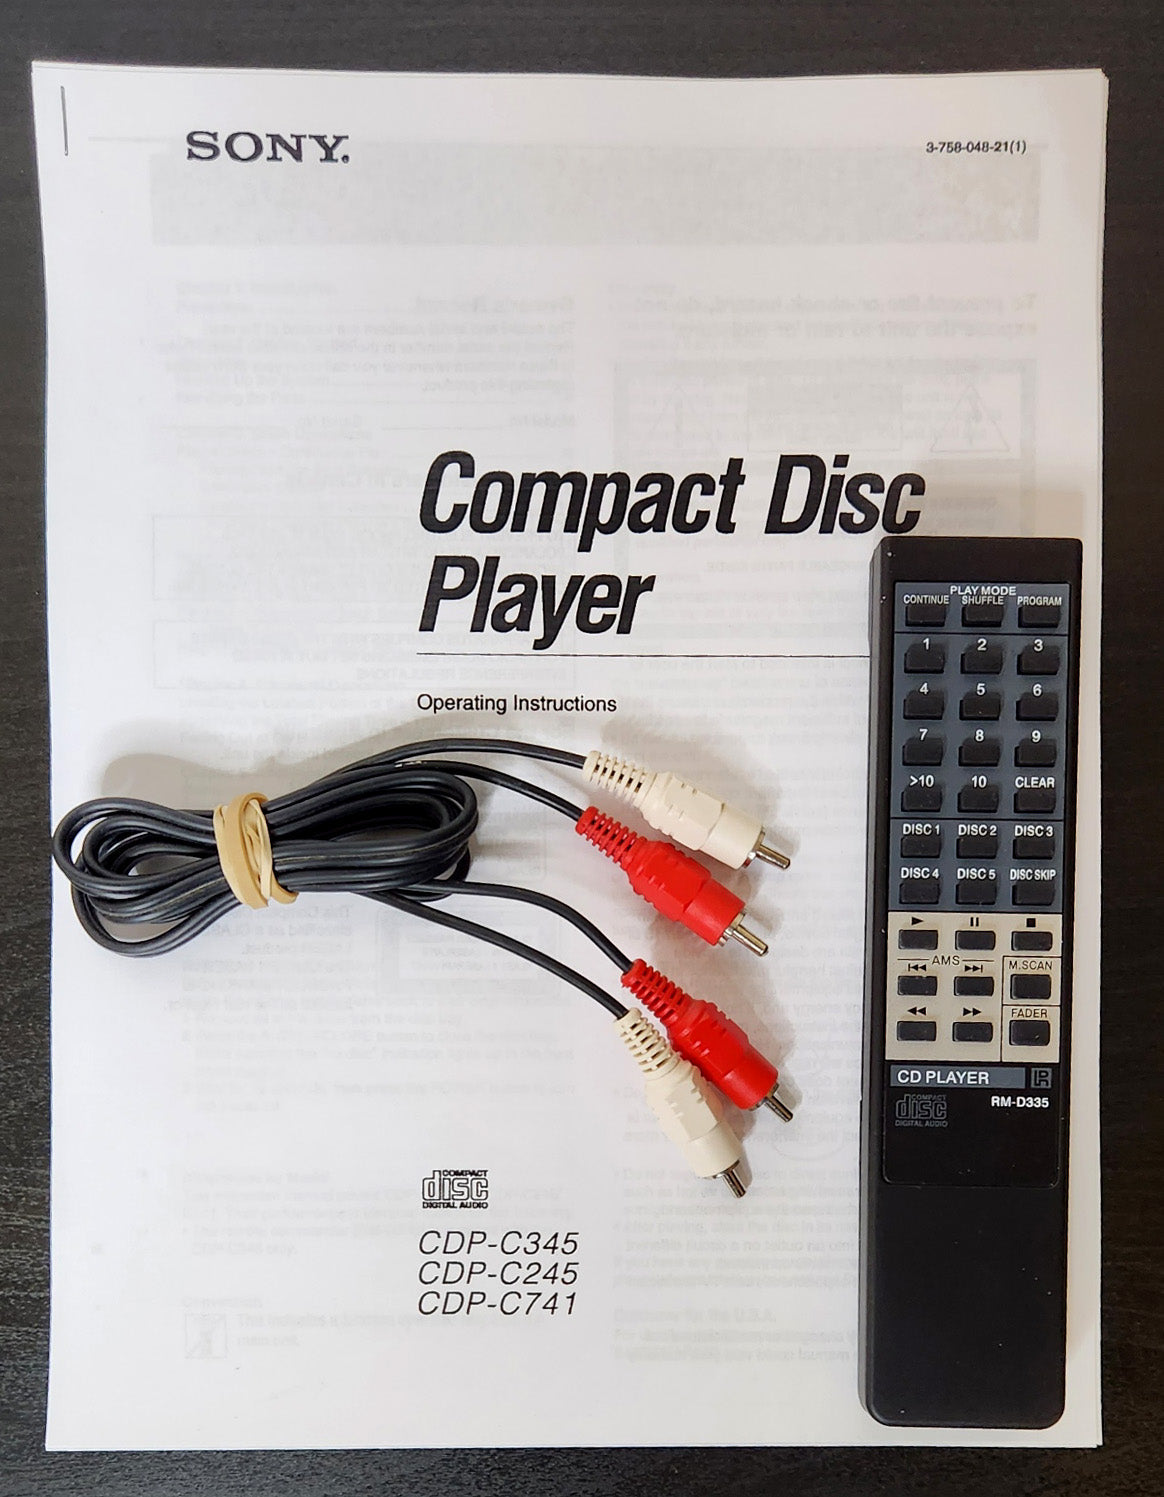 Copy of Sony CDP-C345 5-Disc Carousel CD Changer - Manual and Remote Control